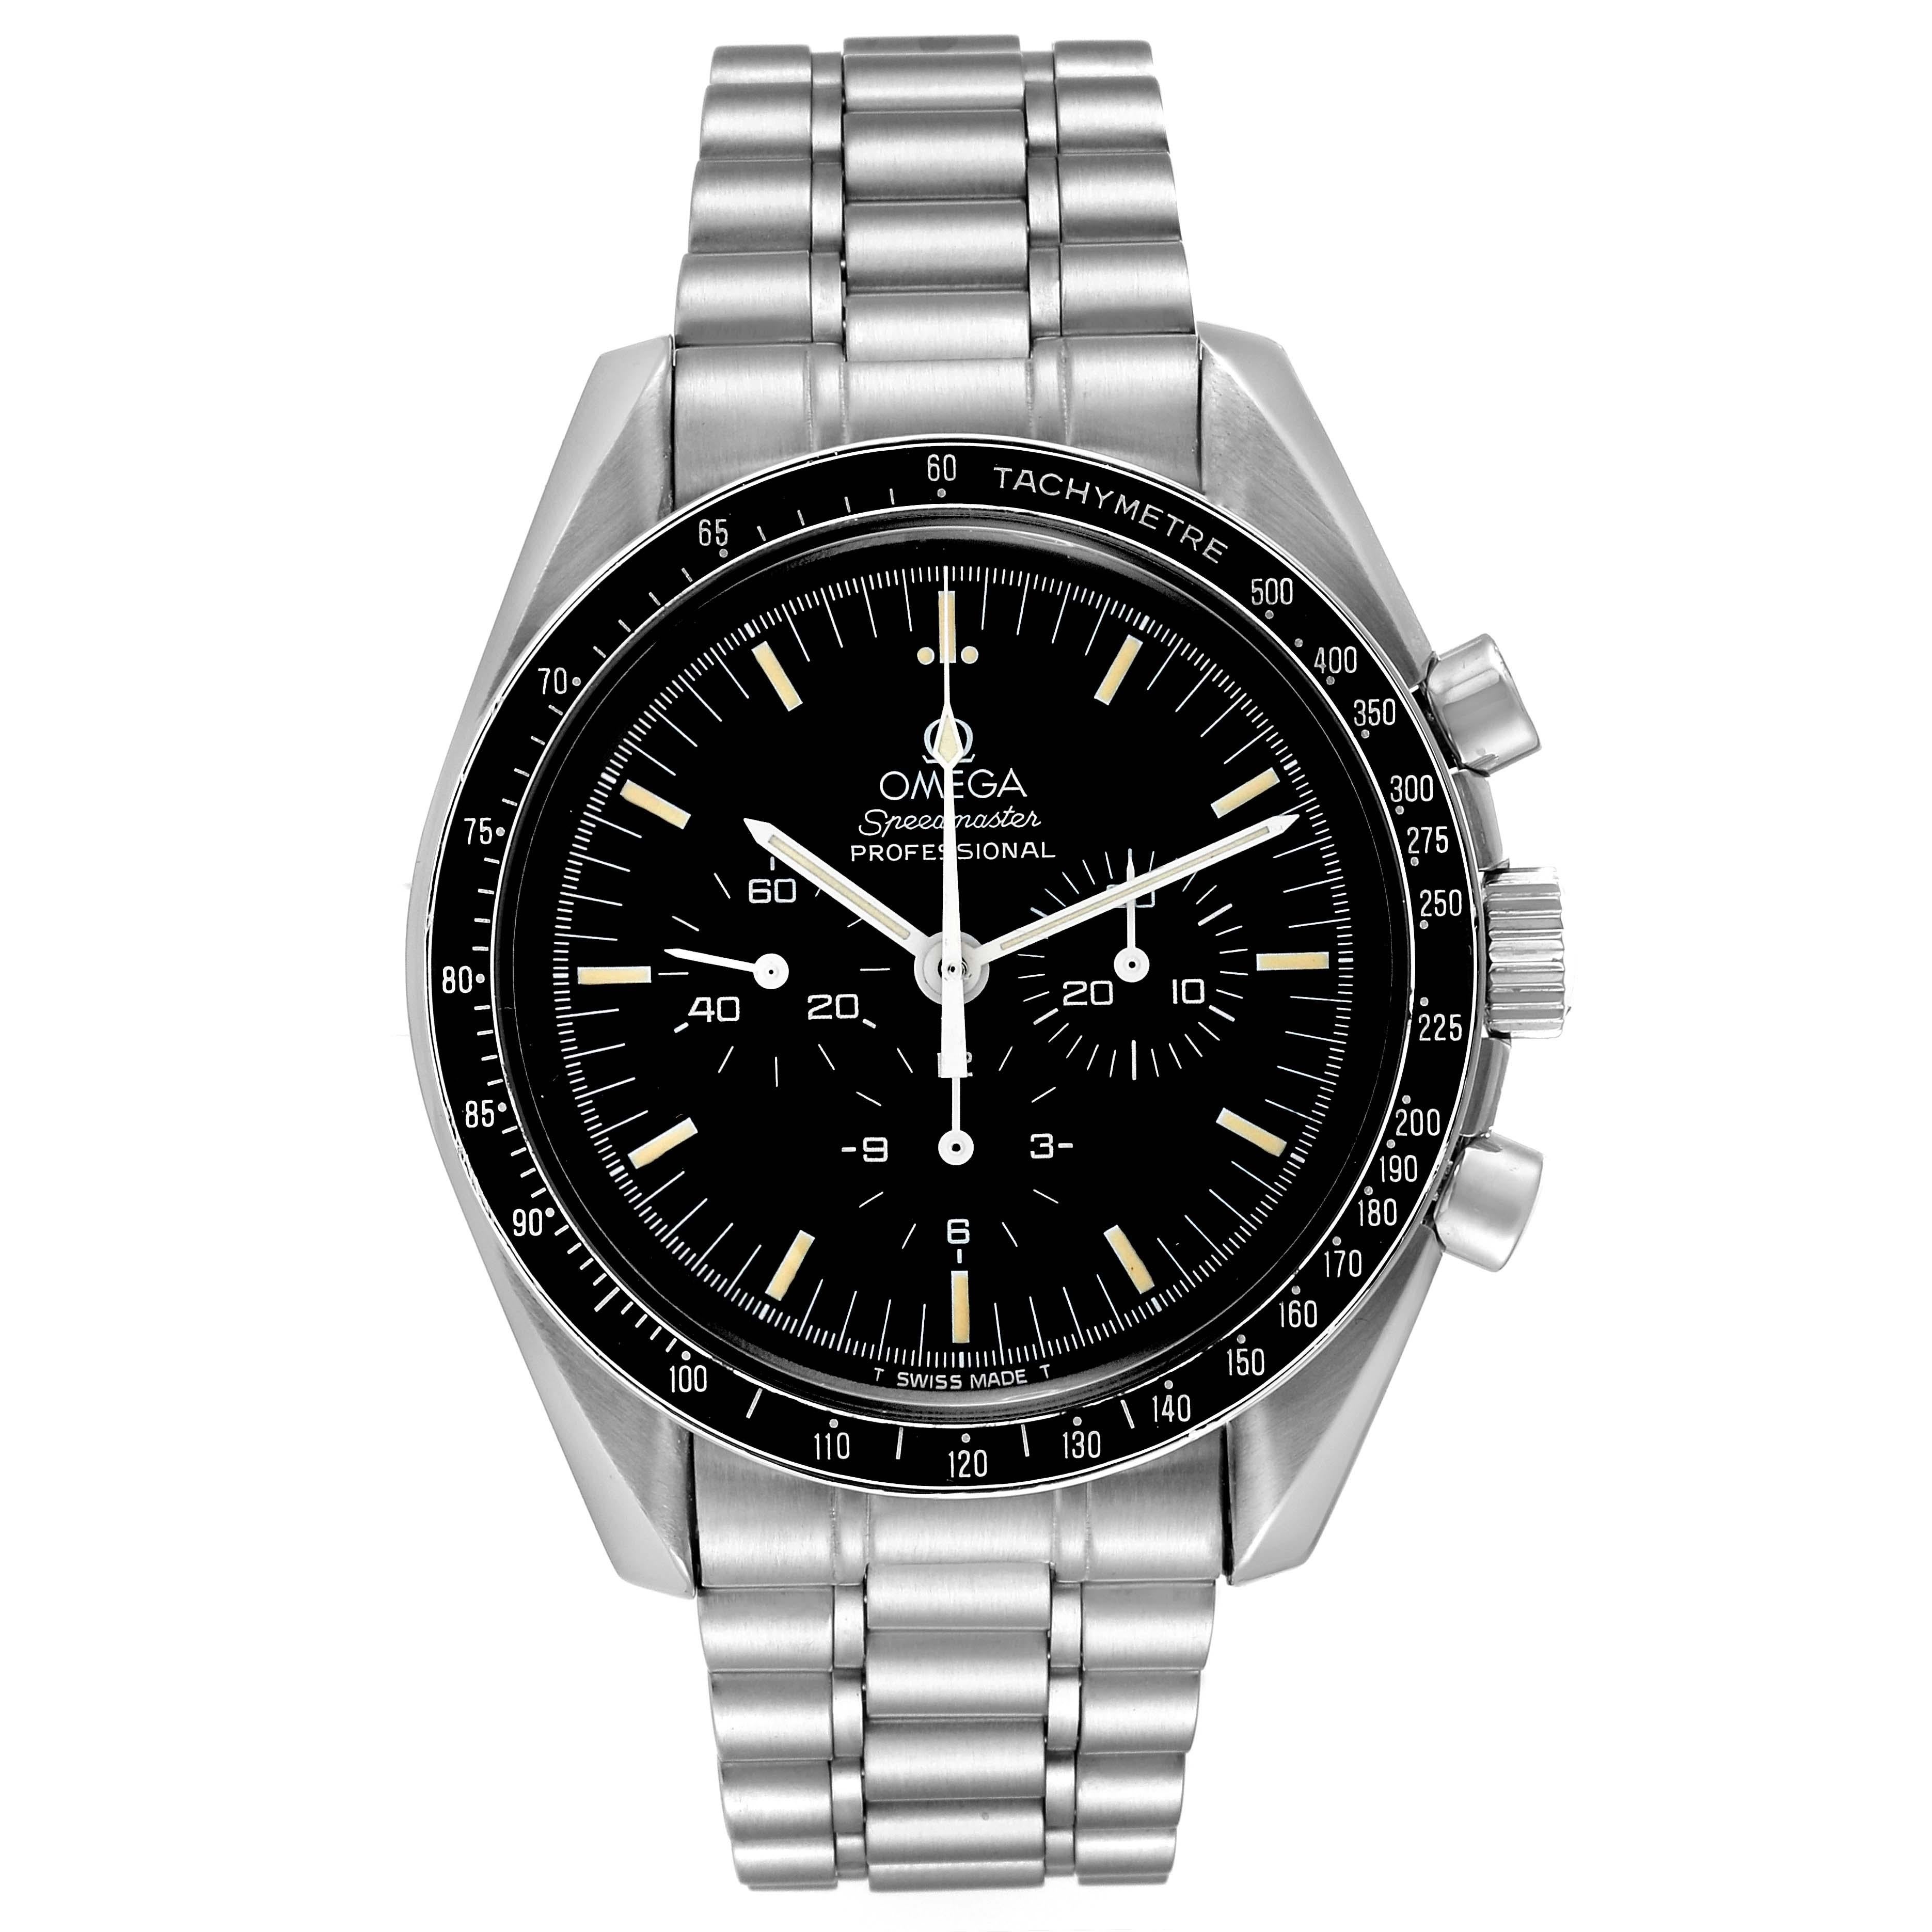 Omega Speedmaster 861 Black Dial Steel Mens Moon Watch 3590.50.00. Manual winding chronograph movement caliber 861. Stainless steel case 42.0 mm in diameter. Three-body, screwed - down case. Omega logo on the crown. Black tachymeter bezel. Hesolite